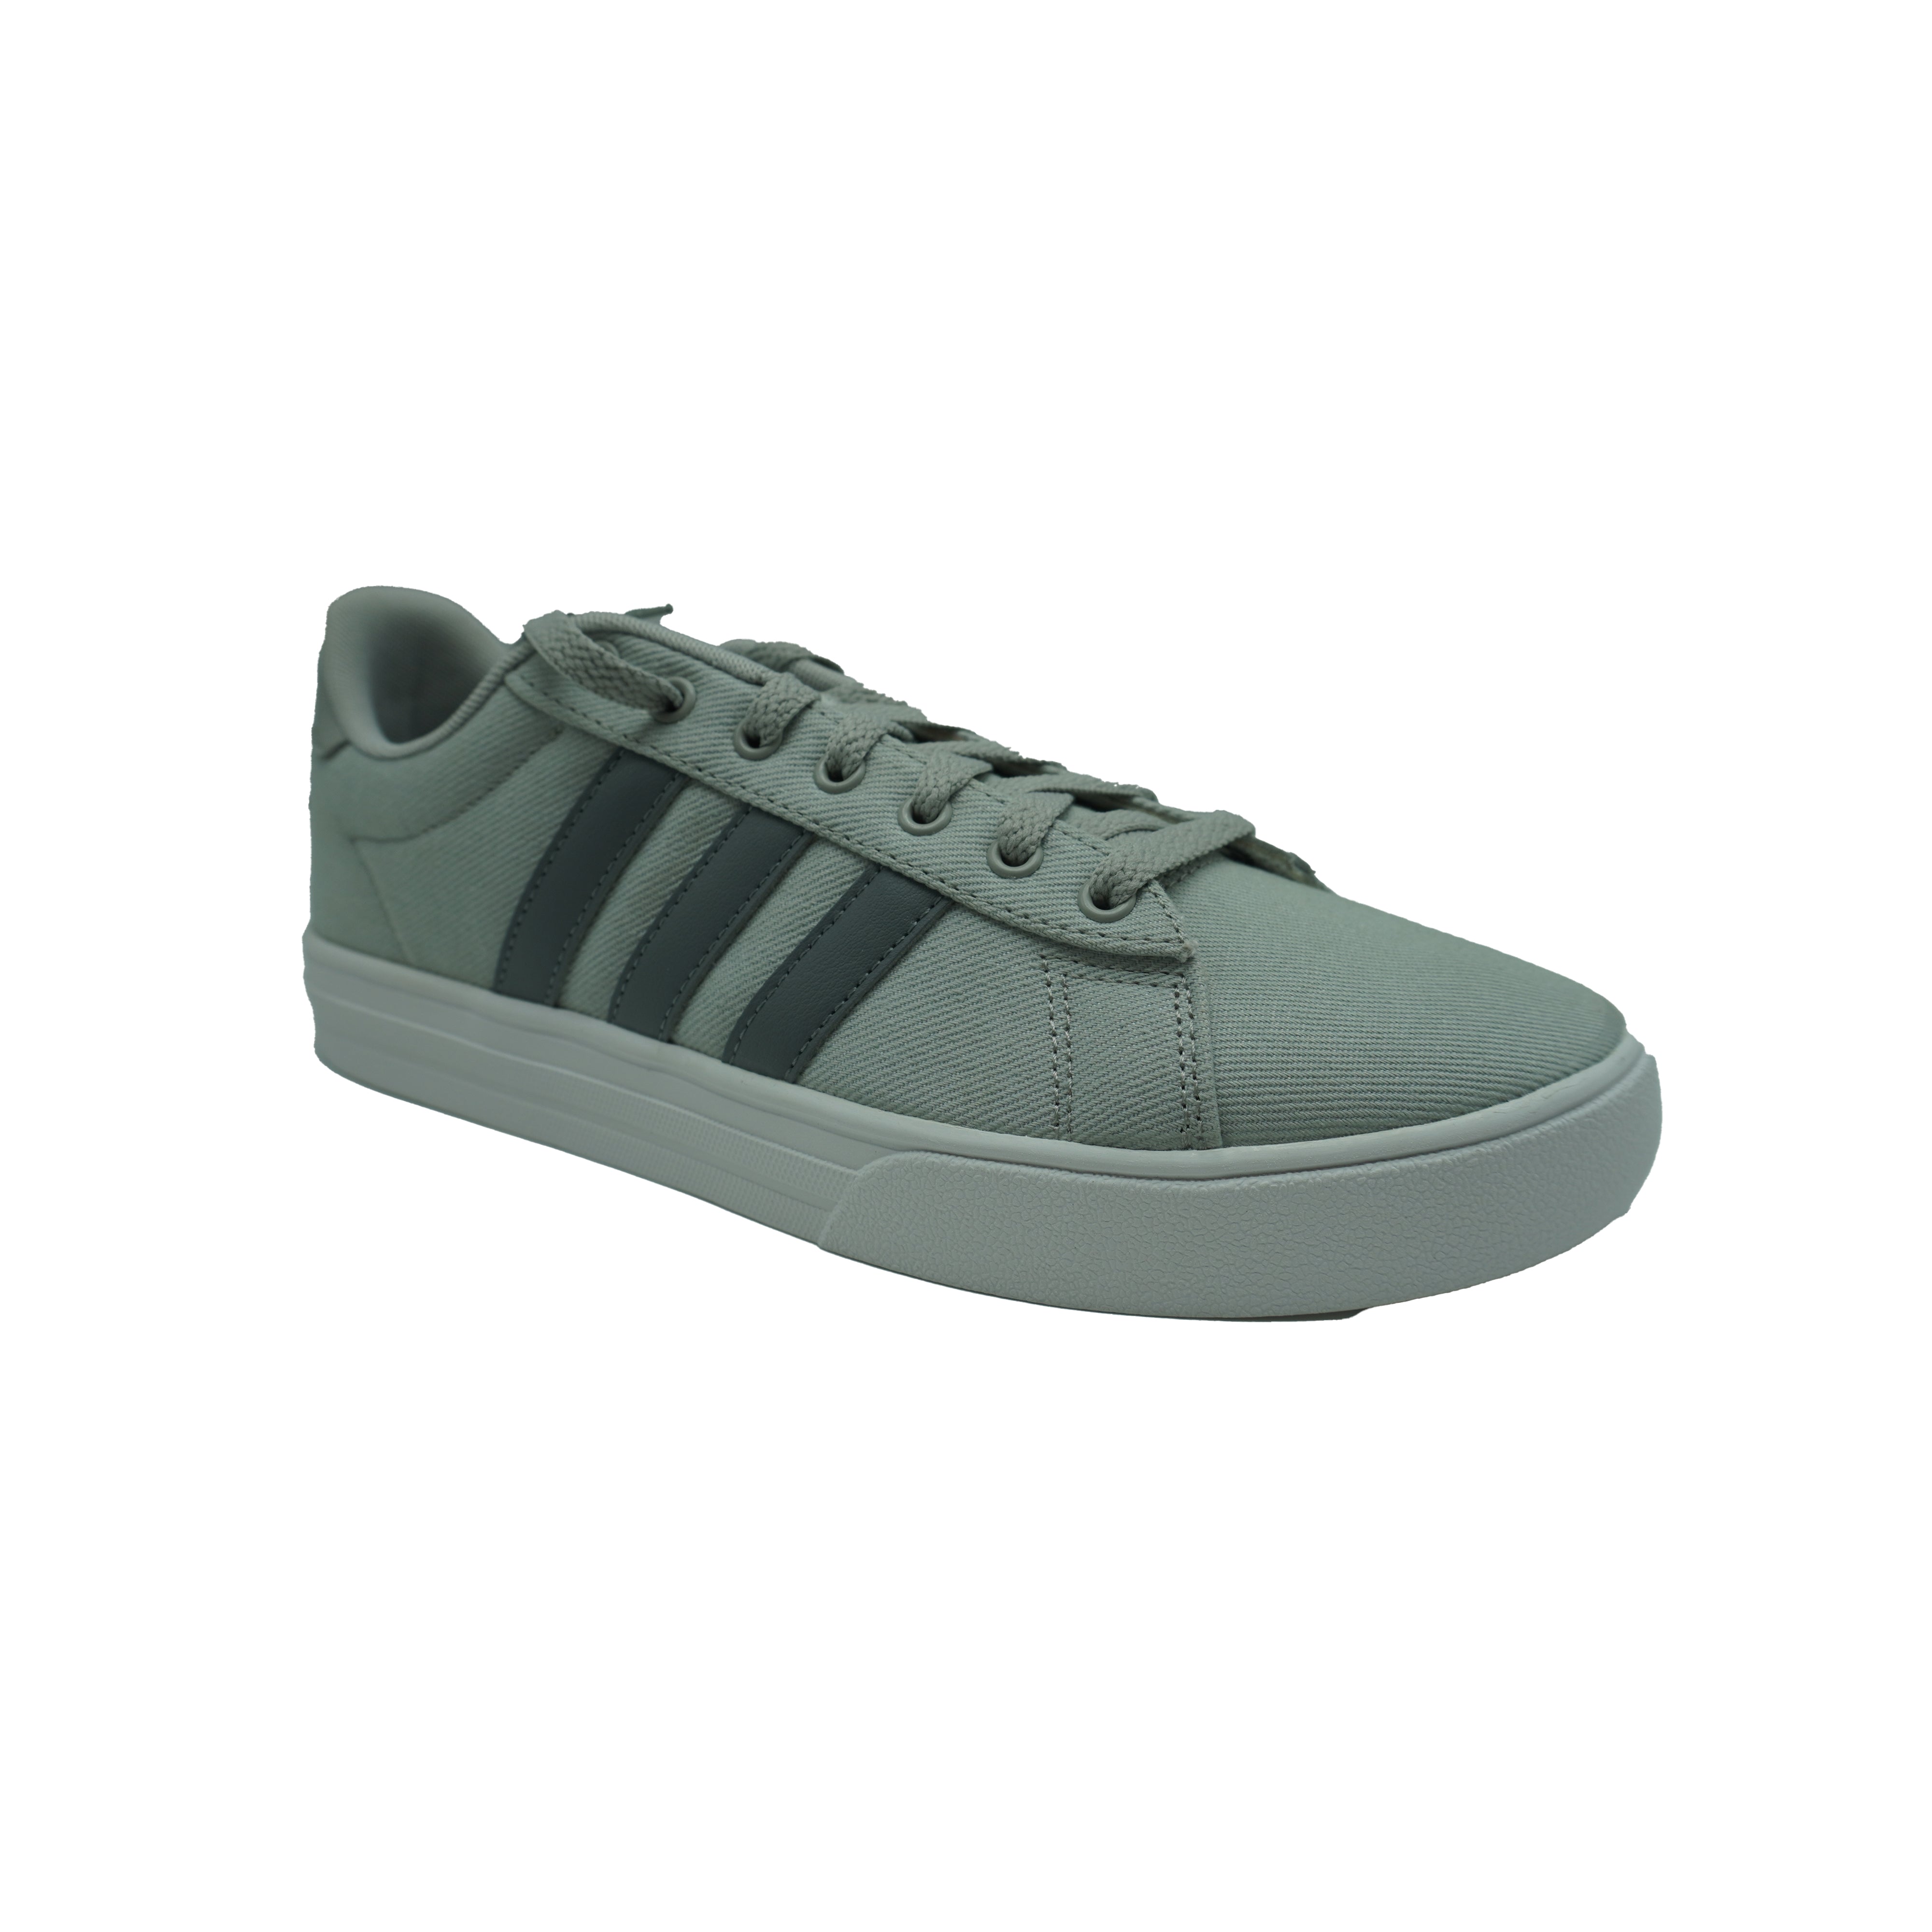 Adidas Men's Daily Casual Canvas Sneakers Gray – Uber Shop Retail Store